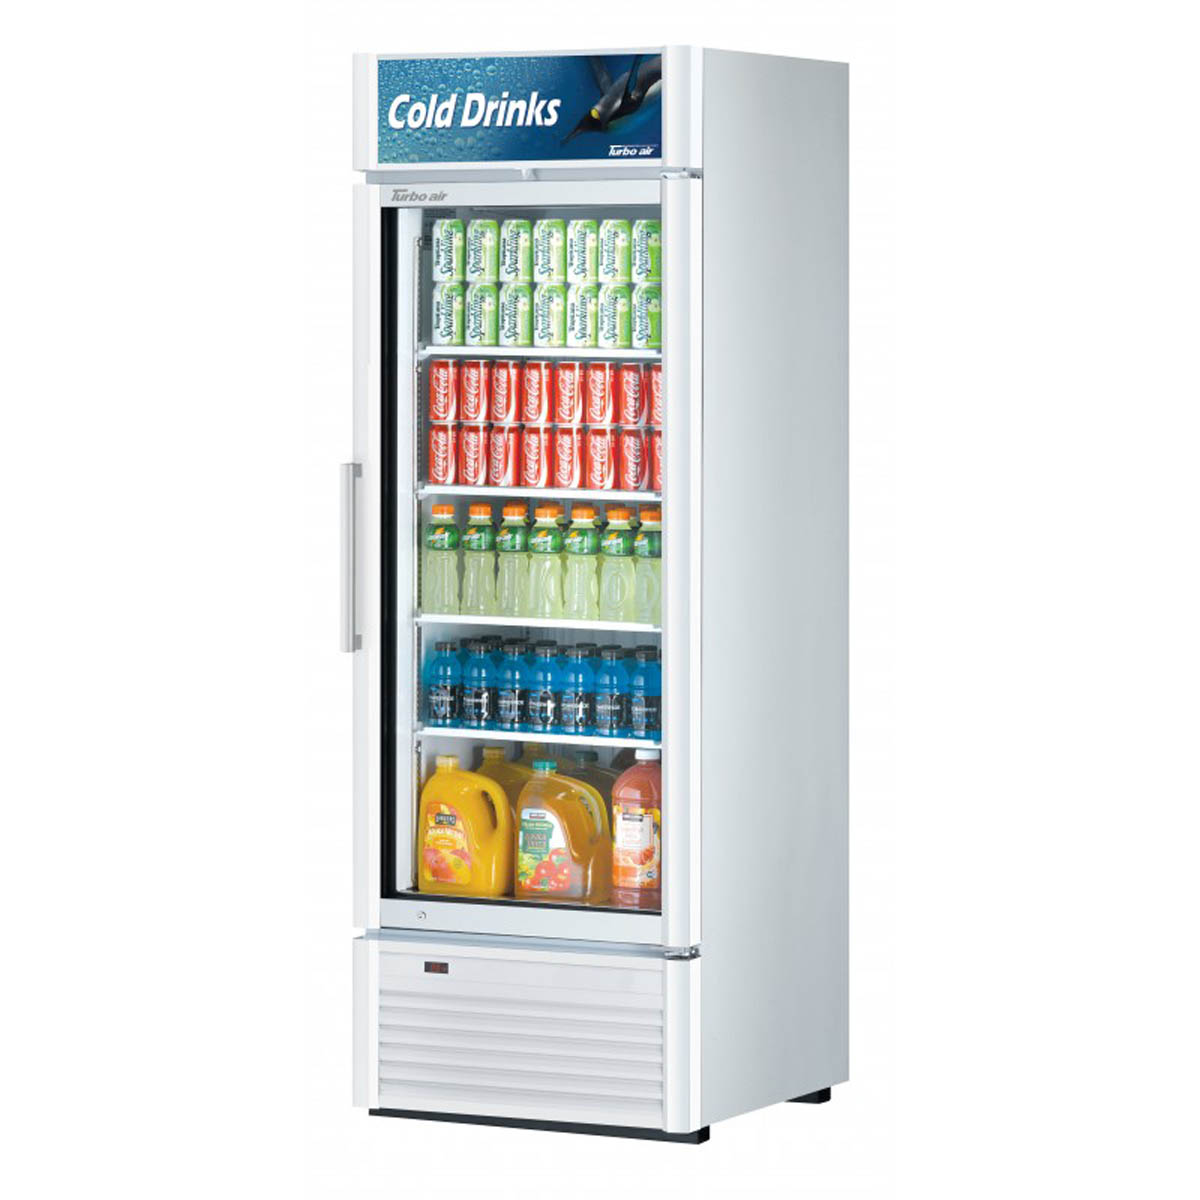 Turbo Air TGM-23SD-N6 27″ One Section Merchandiser Refrigerator with Glass Door, 19.04 cu. ft.